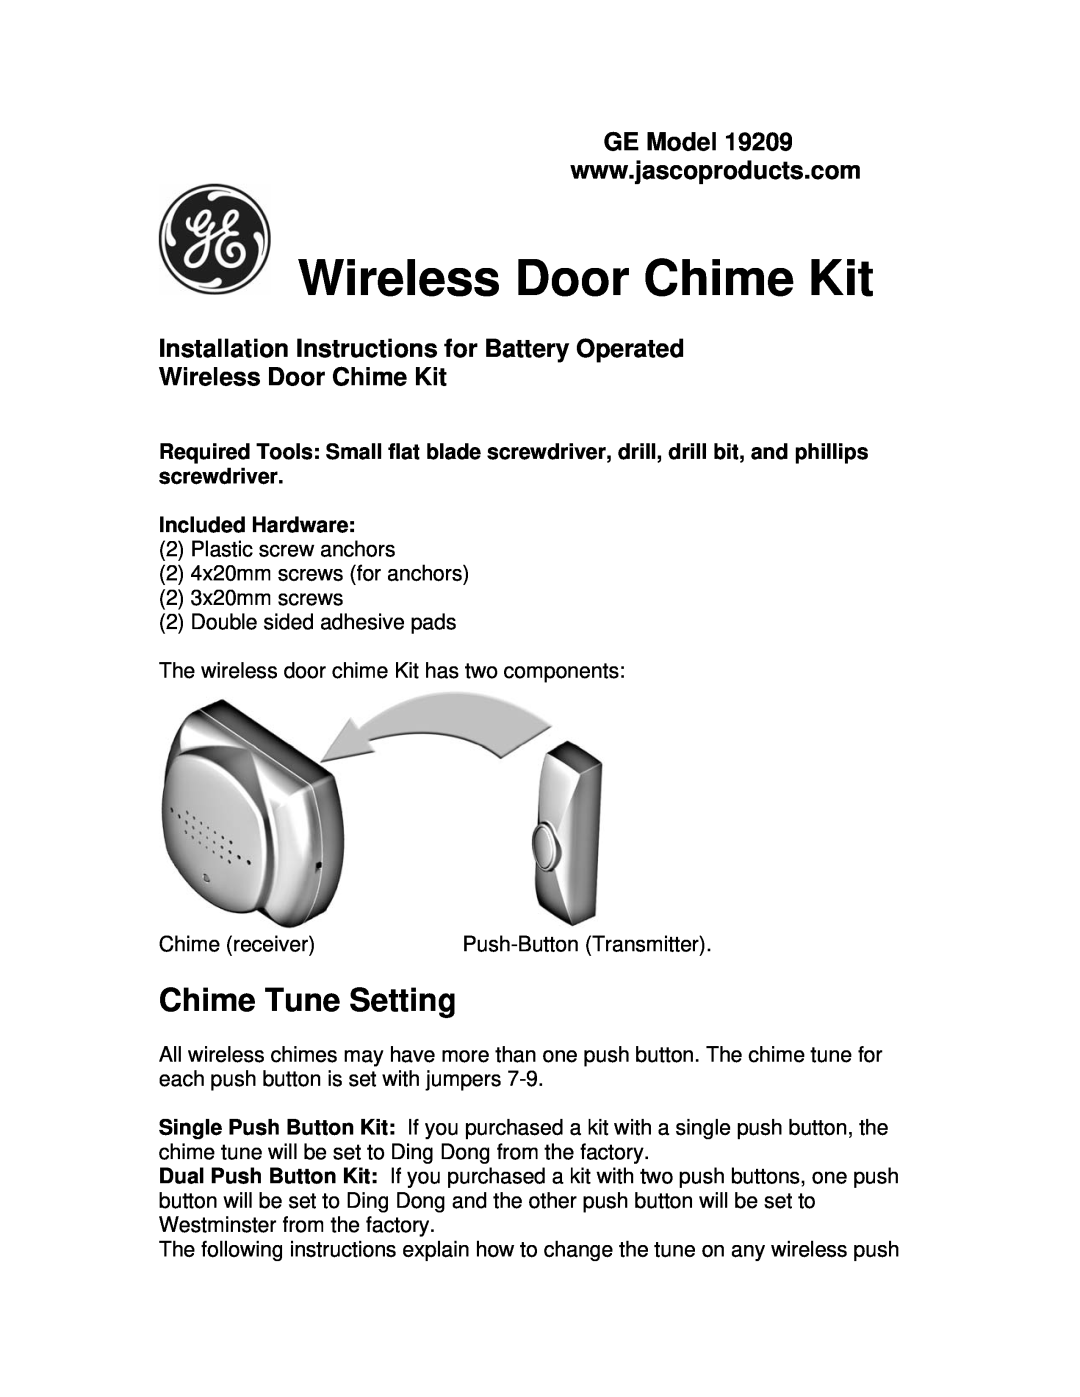 Jasco GE 19209 installation instructions Chime Tune Setting, Included Hardware, Wireless Door Chime Kit 